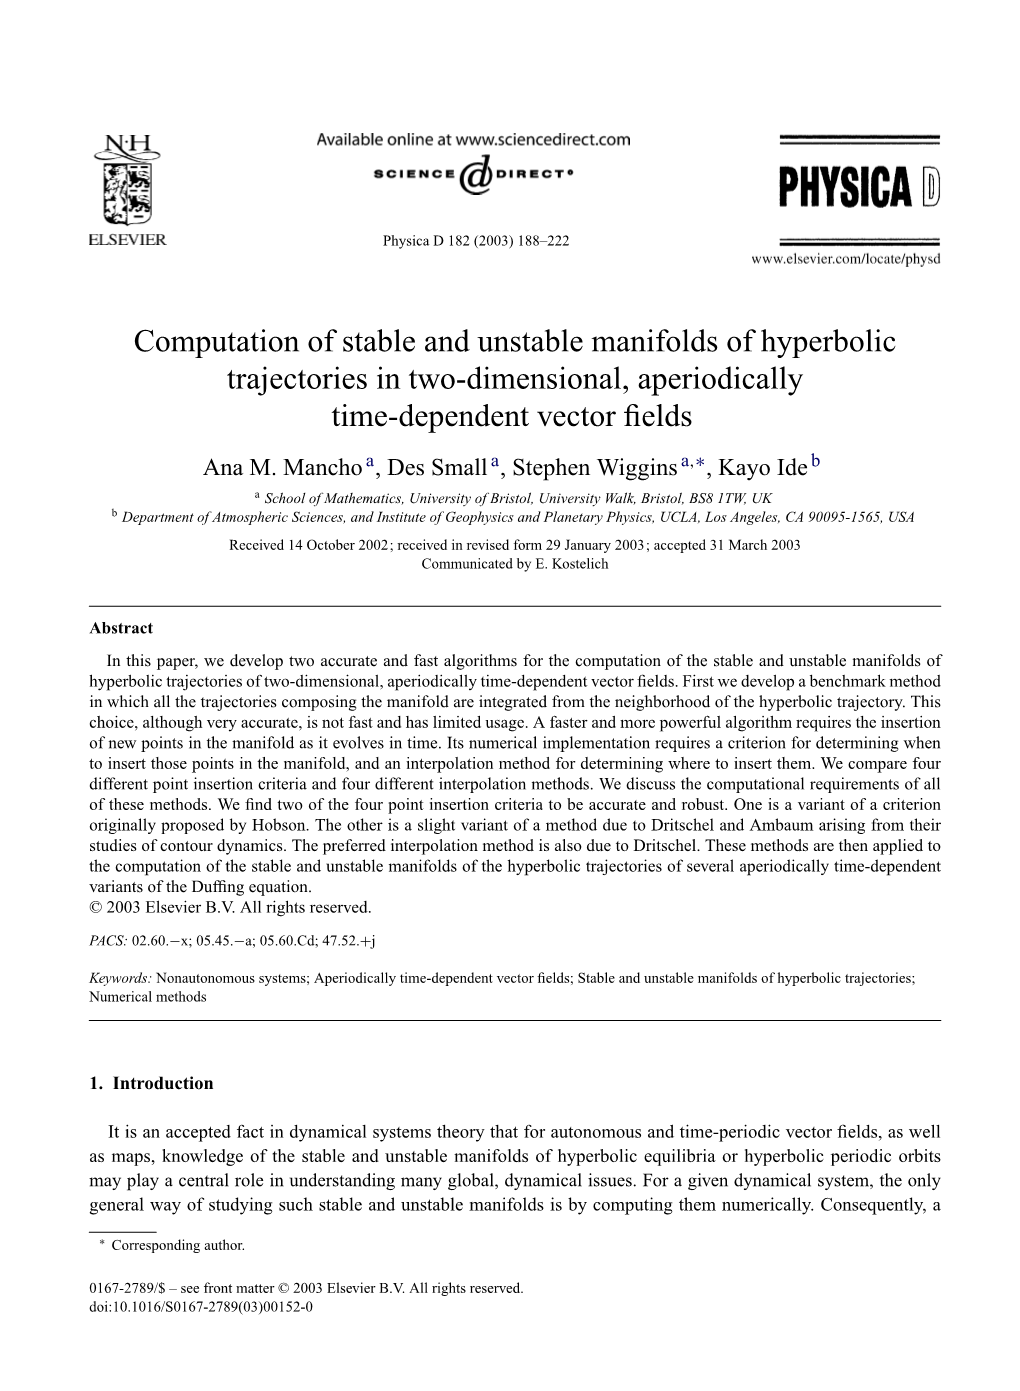 Computation of Stable and Unstable Manifolds of Hyperbolic Trajectories in Two-Dimensional, Aperiodically Time-Dependent Vector ﬁelds Ana M